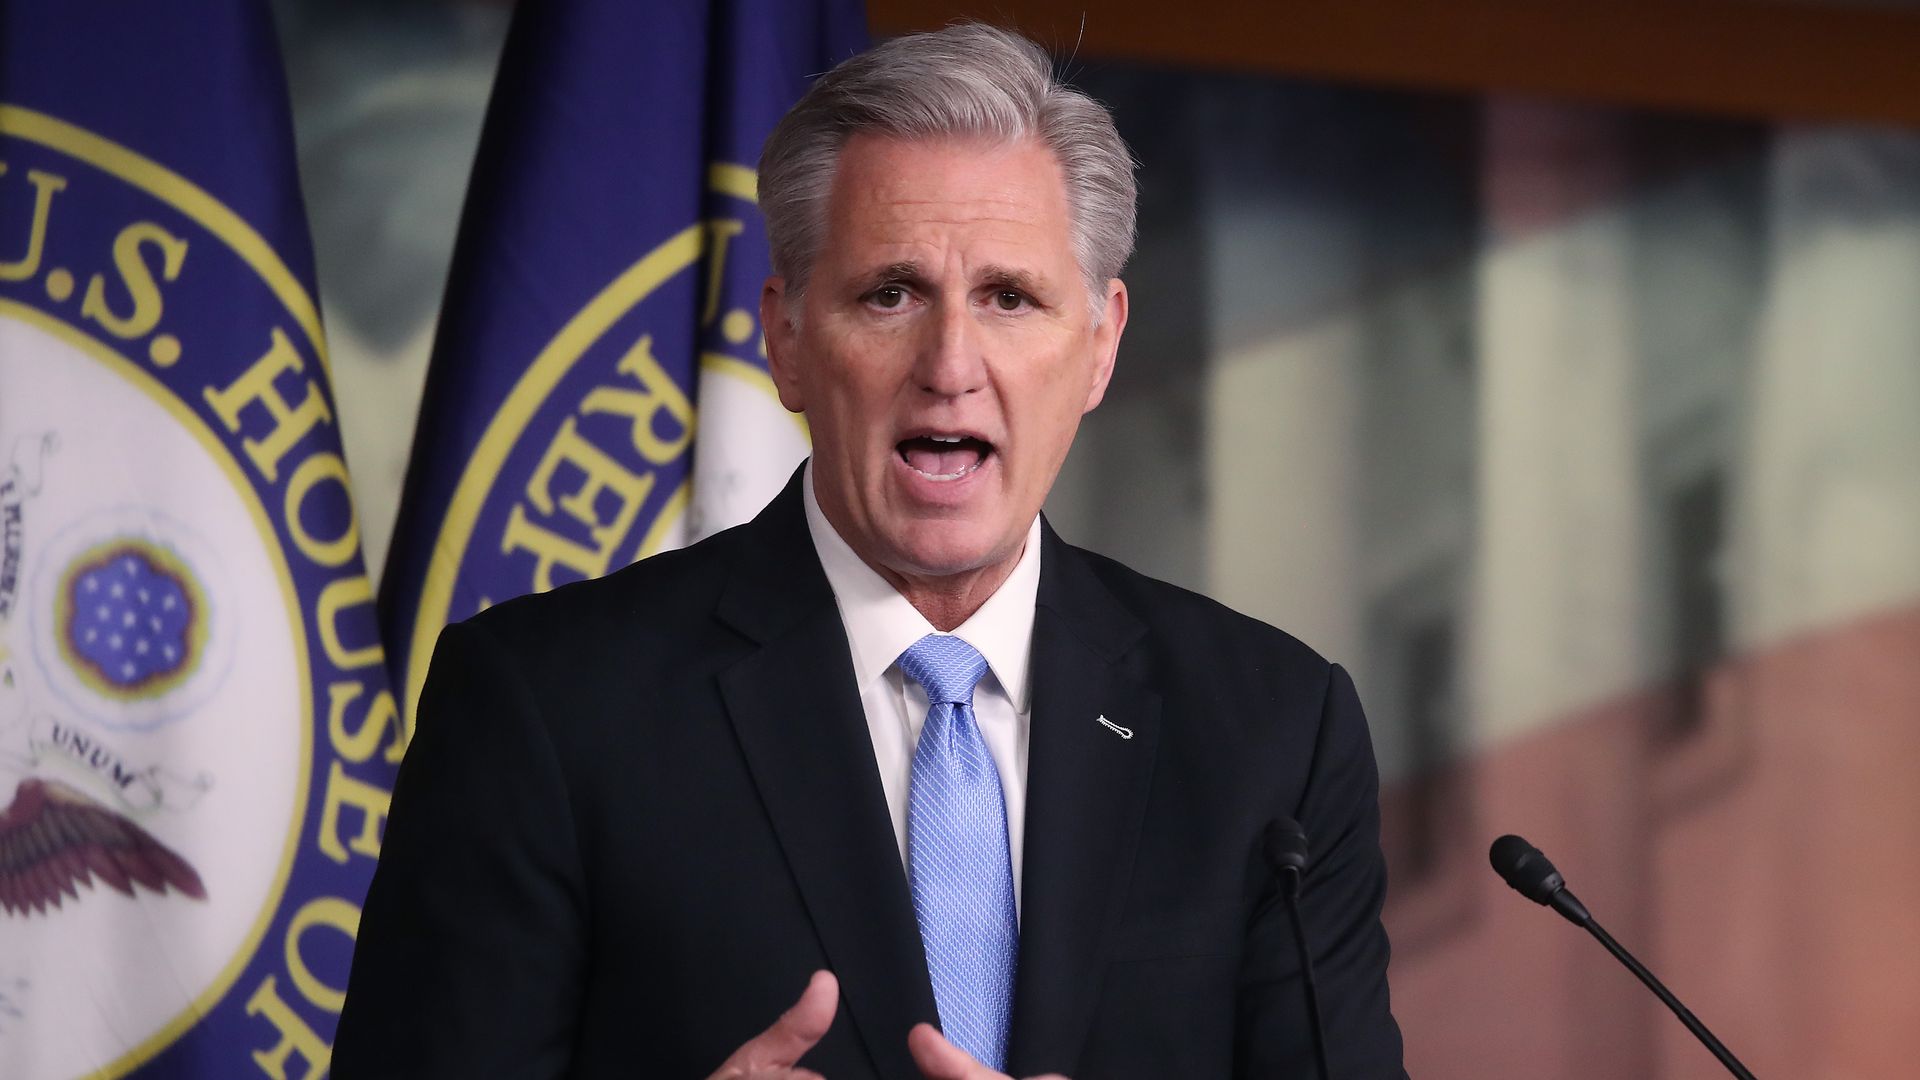 House Minority Leader Kevin McCarthy is seen speaking during a news conference.